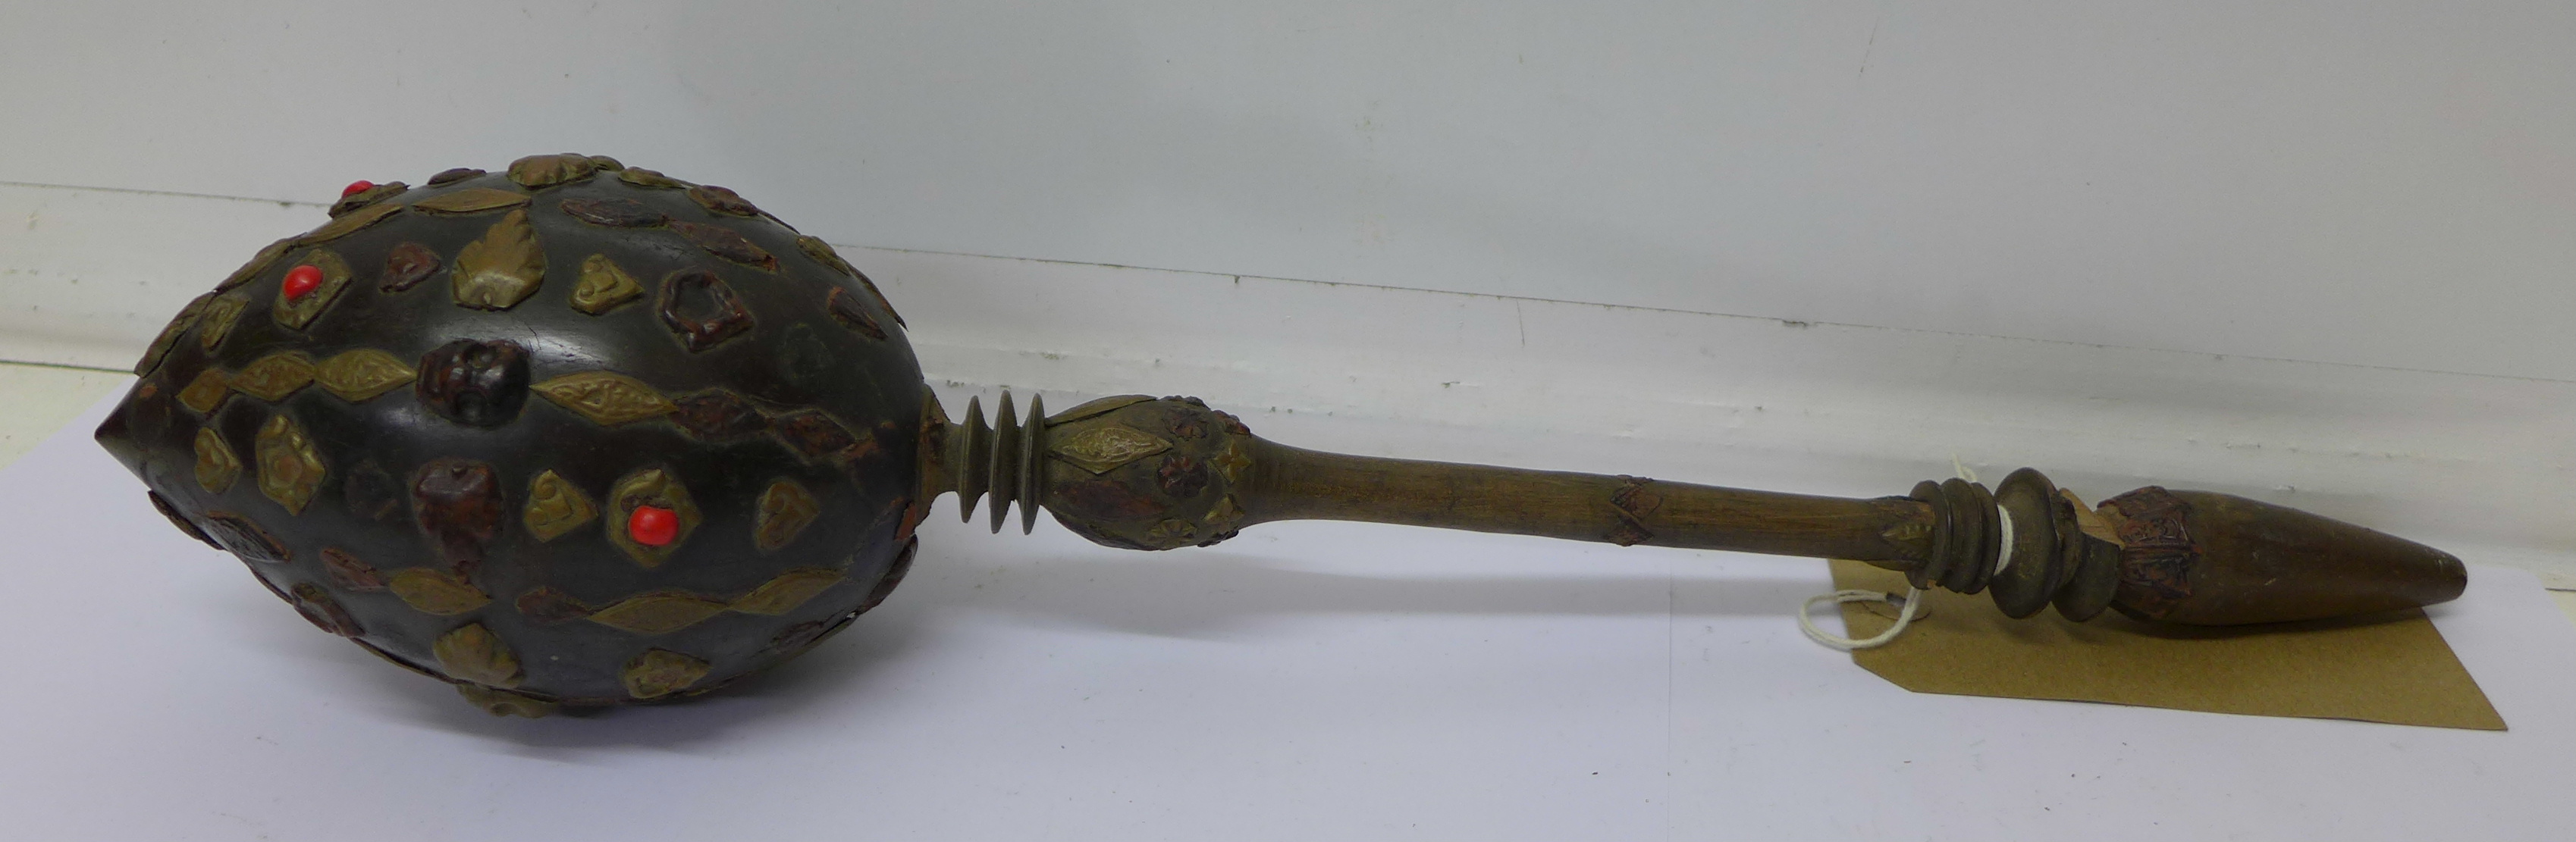 A decorated pipe made from a nut, possibly Mexican,